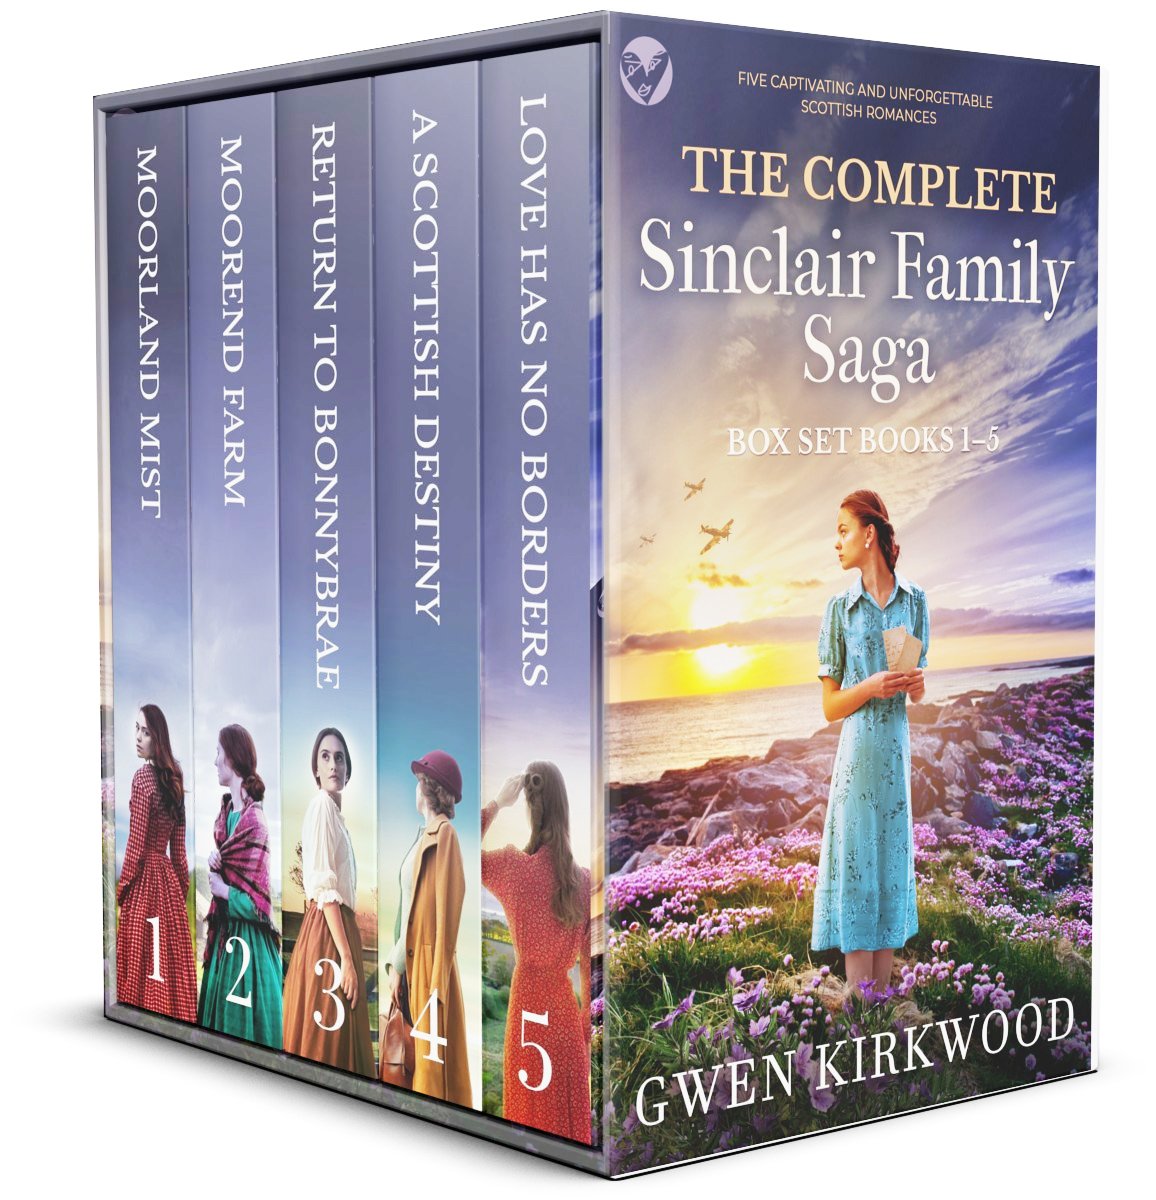 COMPLETE SINCLAIR FAMILY cover publish.jpg